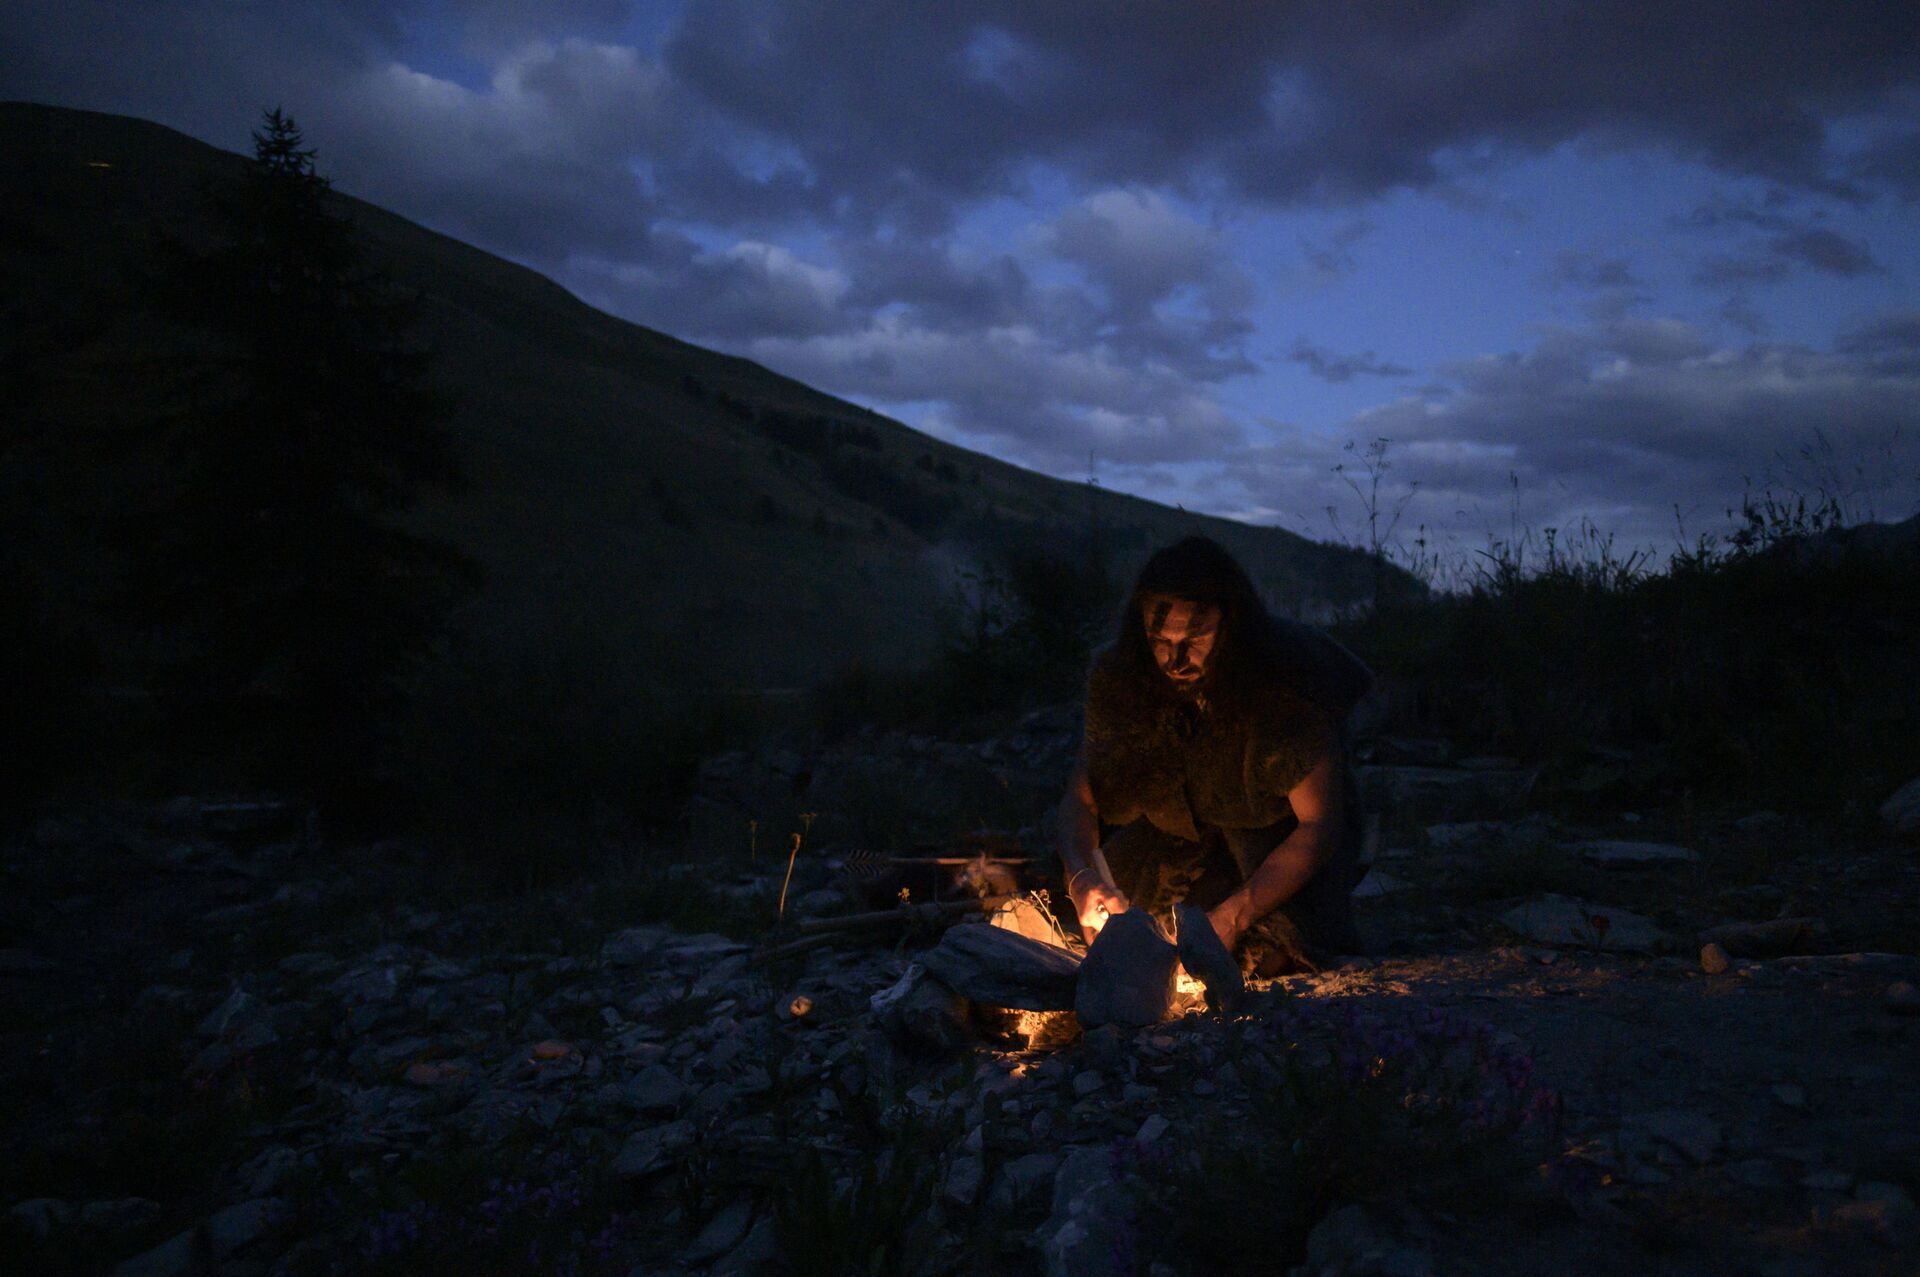 Guido Camia dressed as a Neanderthal Cave man lights a campfire in Chianale, in the Italian Alps, near the French border, on August 7, 2019. - Sputnik International, 1920, 25.11.2021